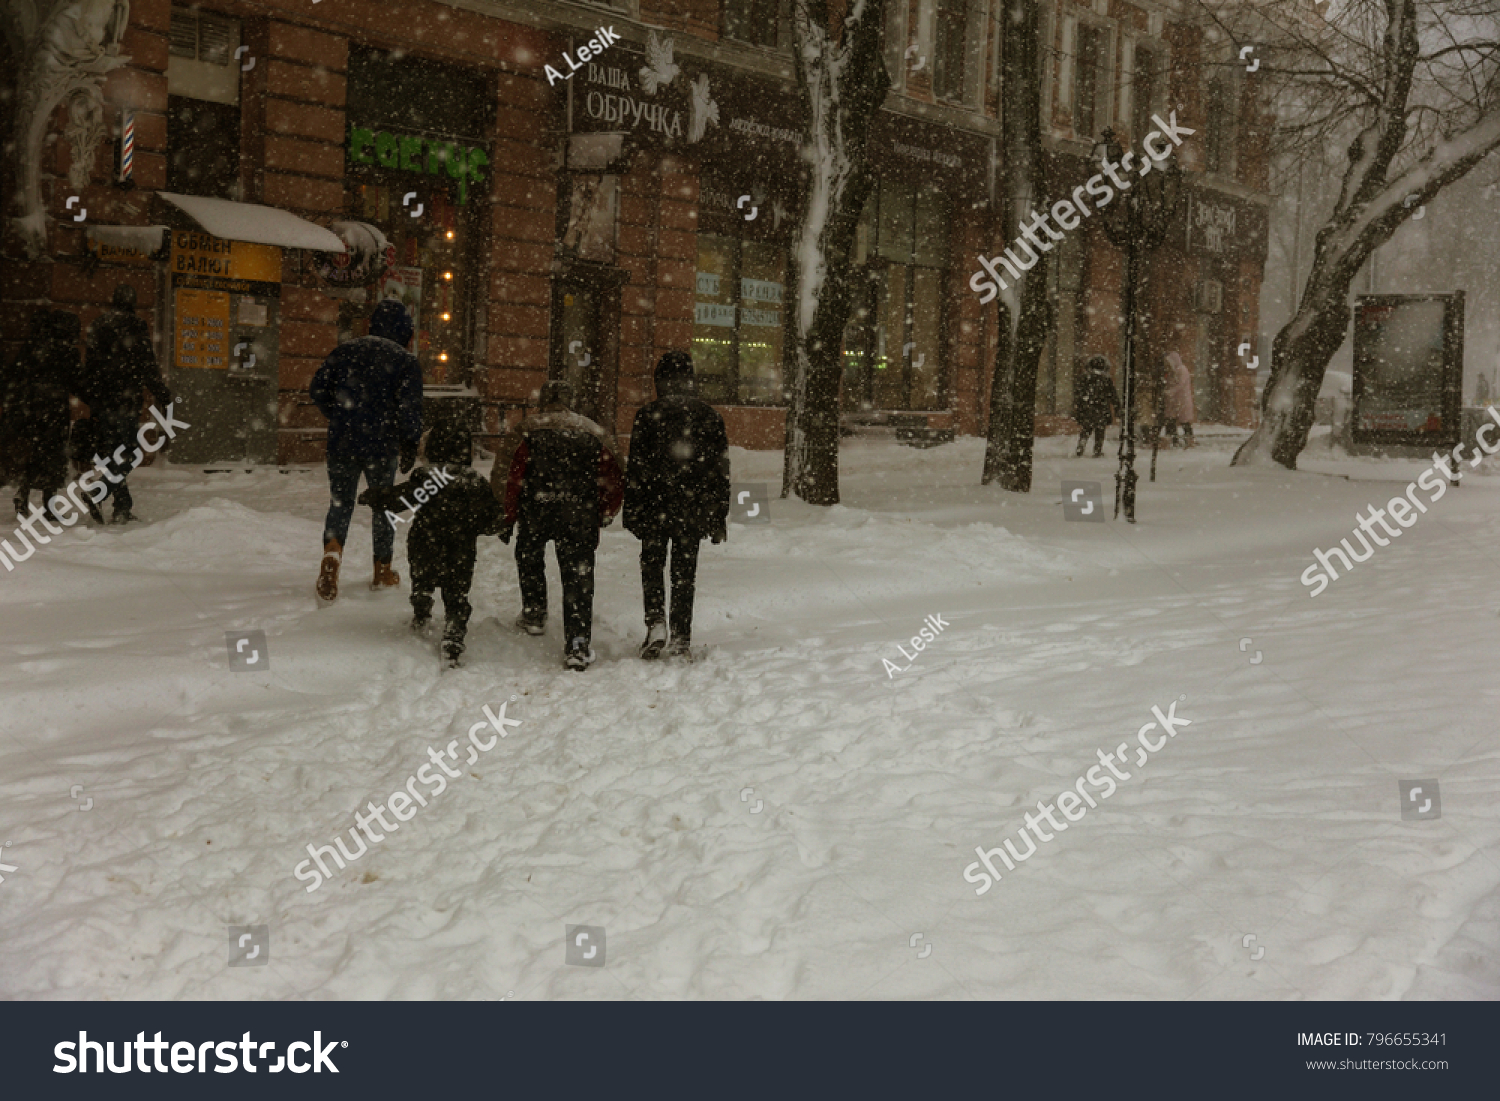 ODESSA, UKRAINE-January 16, 2018: Strong snowfall, cyclone in city streets in winter. Cars are covered with snow. Slippery road. Bad weather in winter: heavy snow and snowstorm. Pedestrians go on snow #796655341